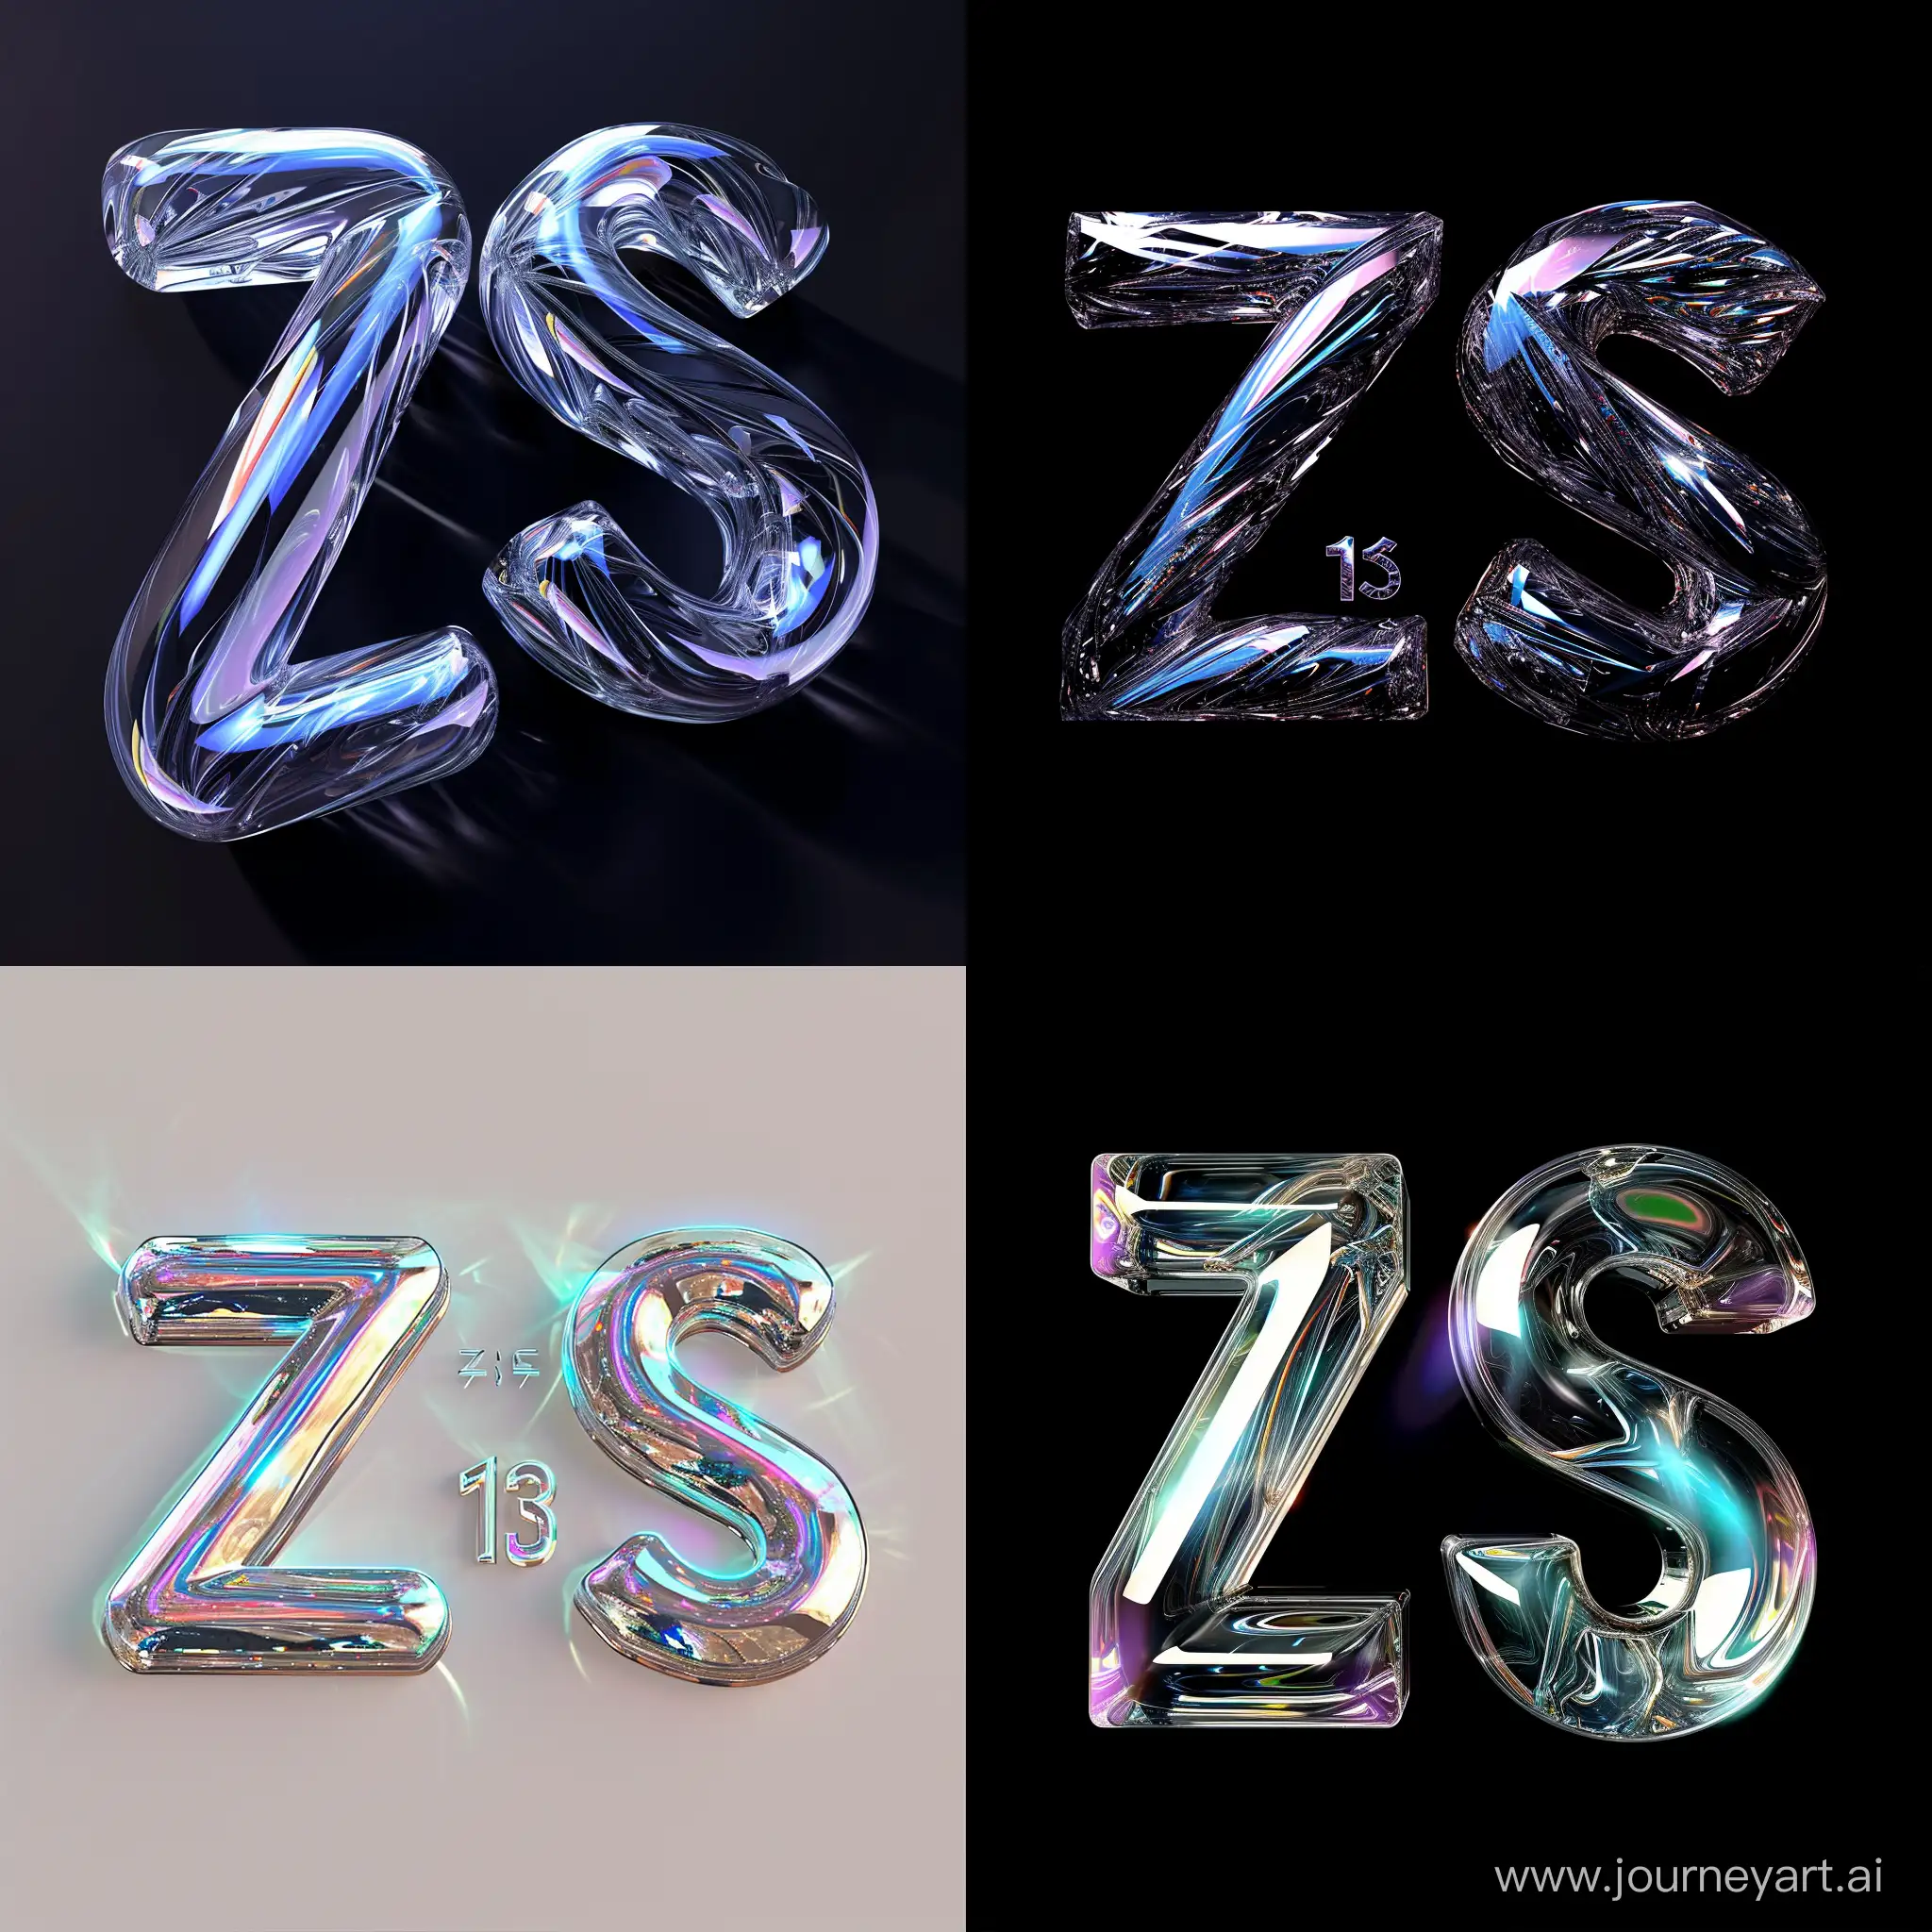 Logo in the form of glass shimmering letters "ZS" and the number "13".